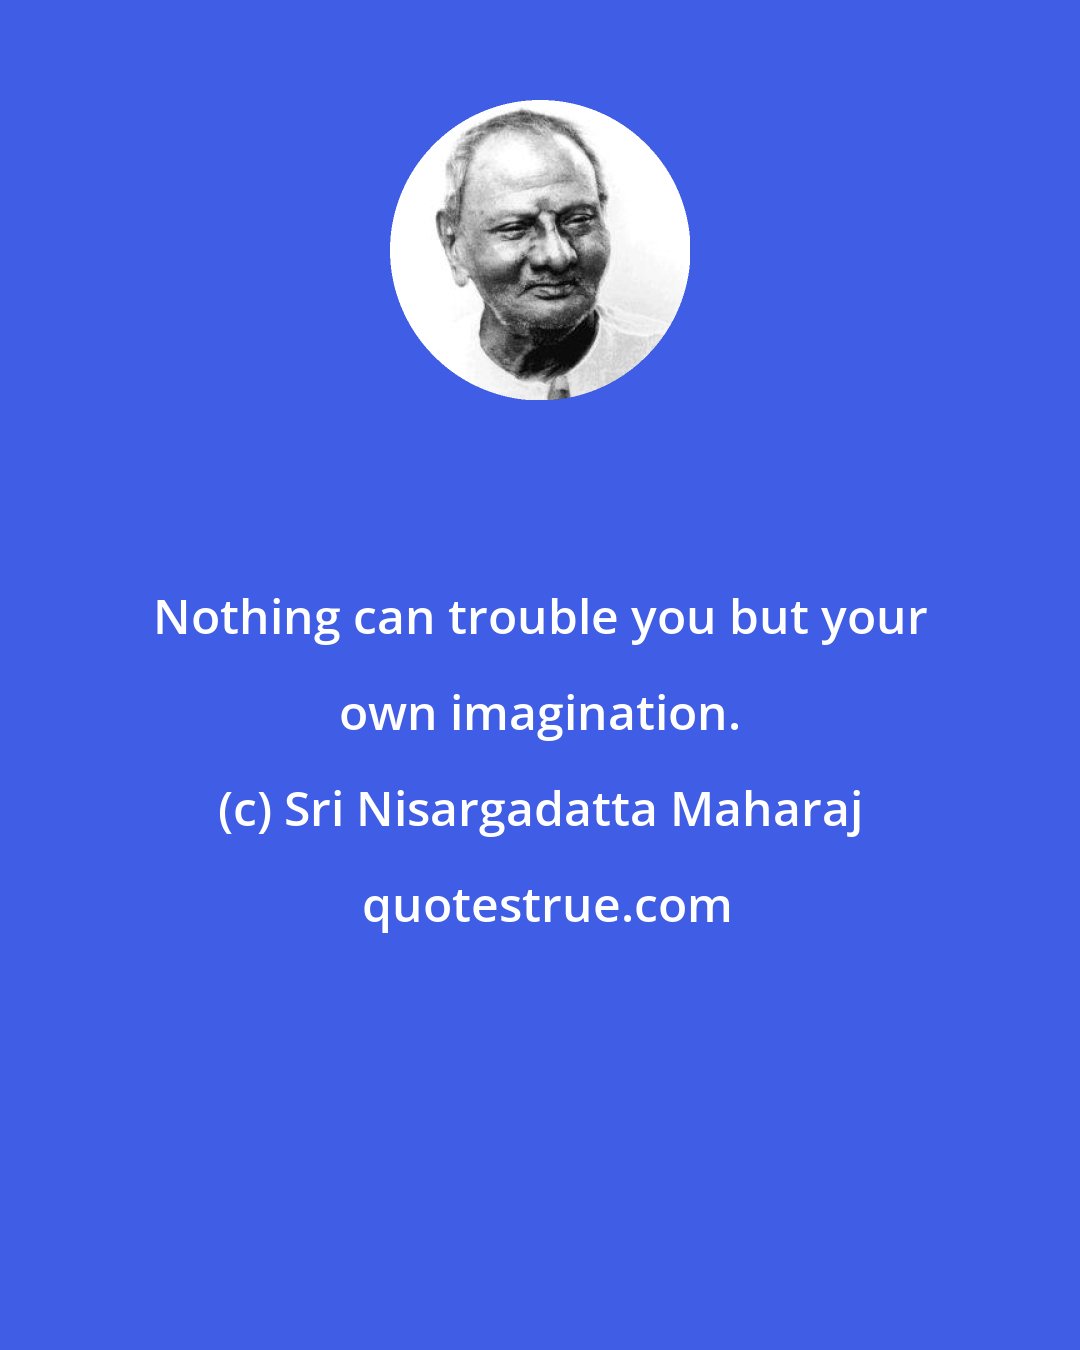 Sri Nisargadatta Maharaj: Nothing can trouble you but your own imagination.